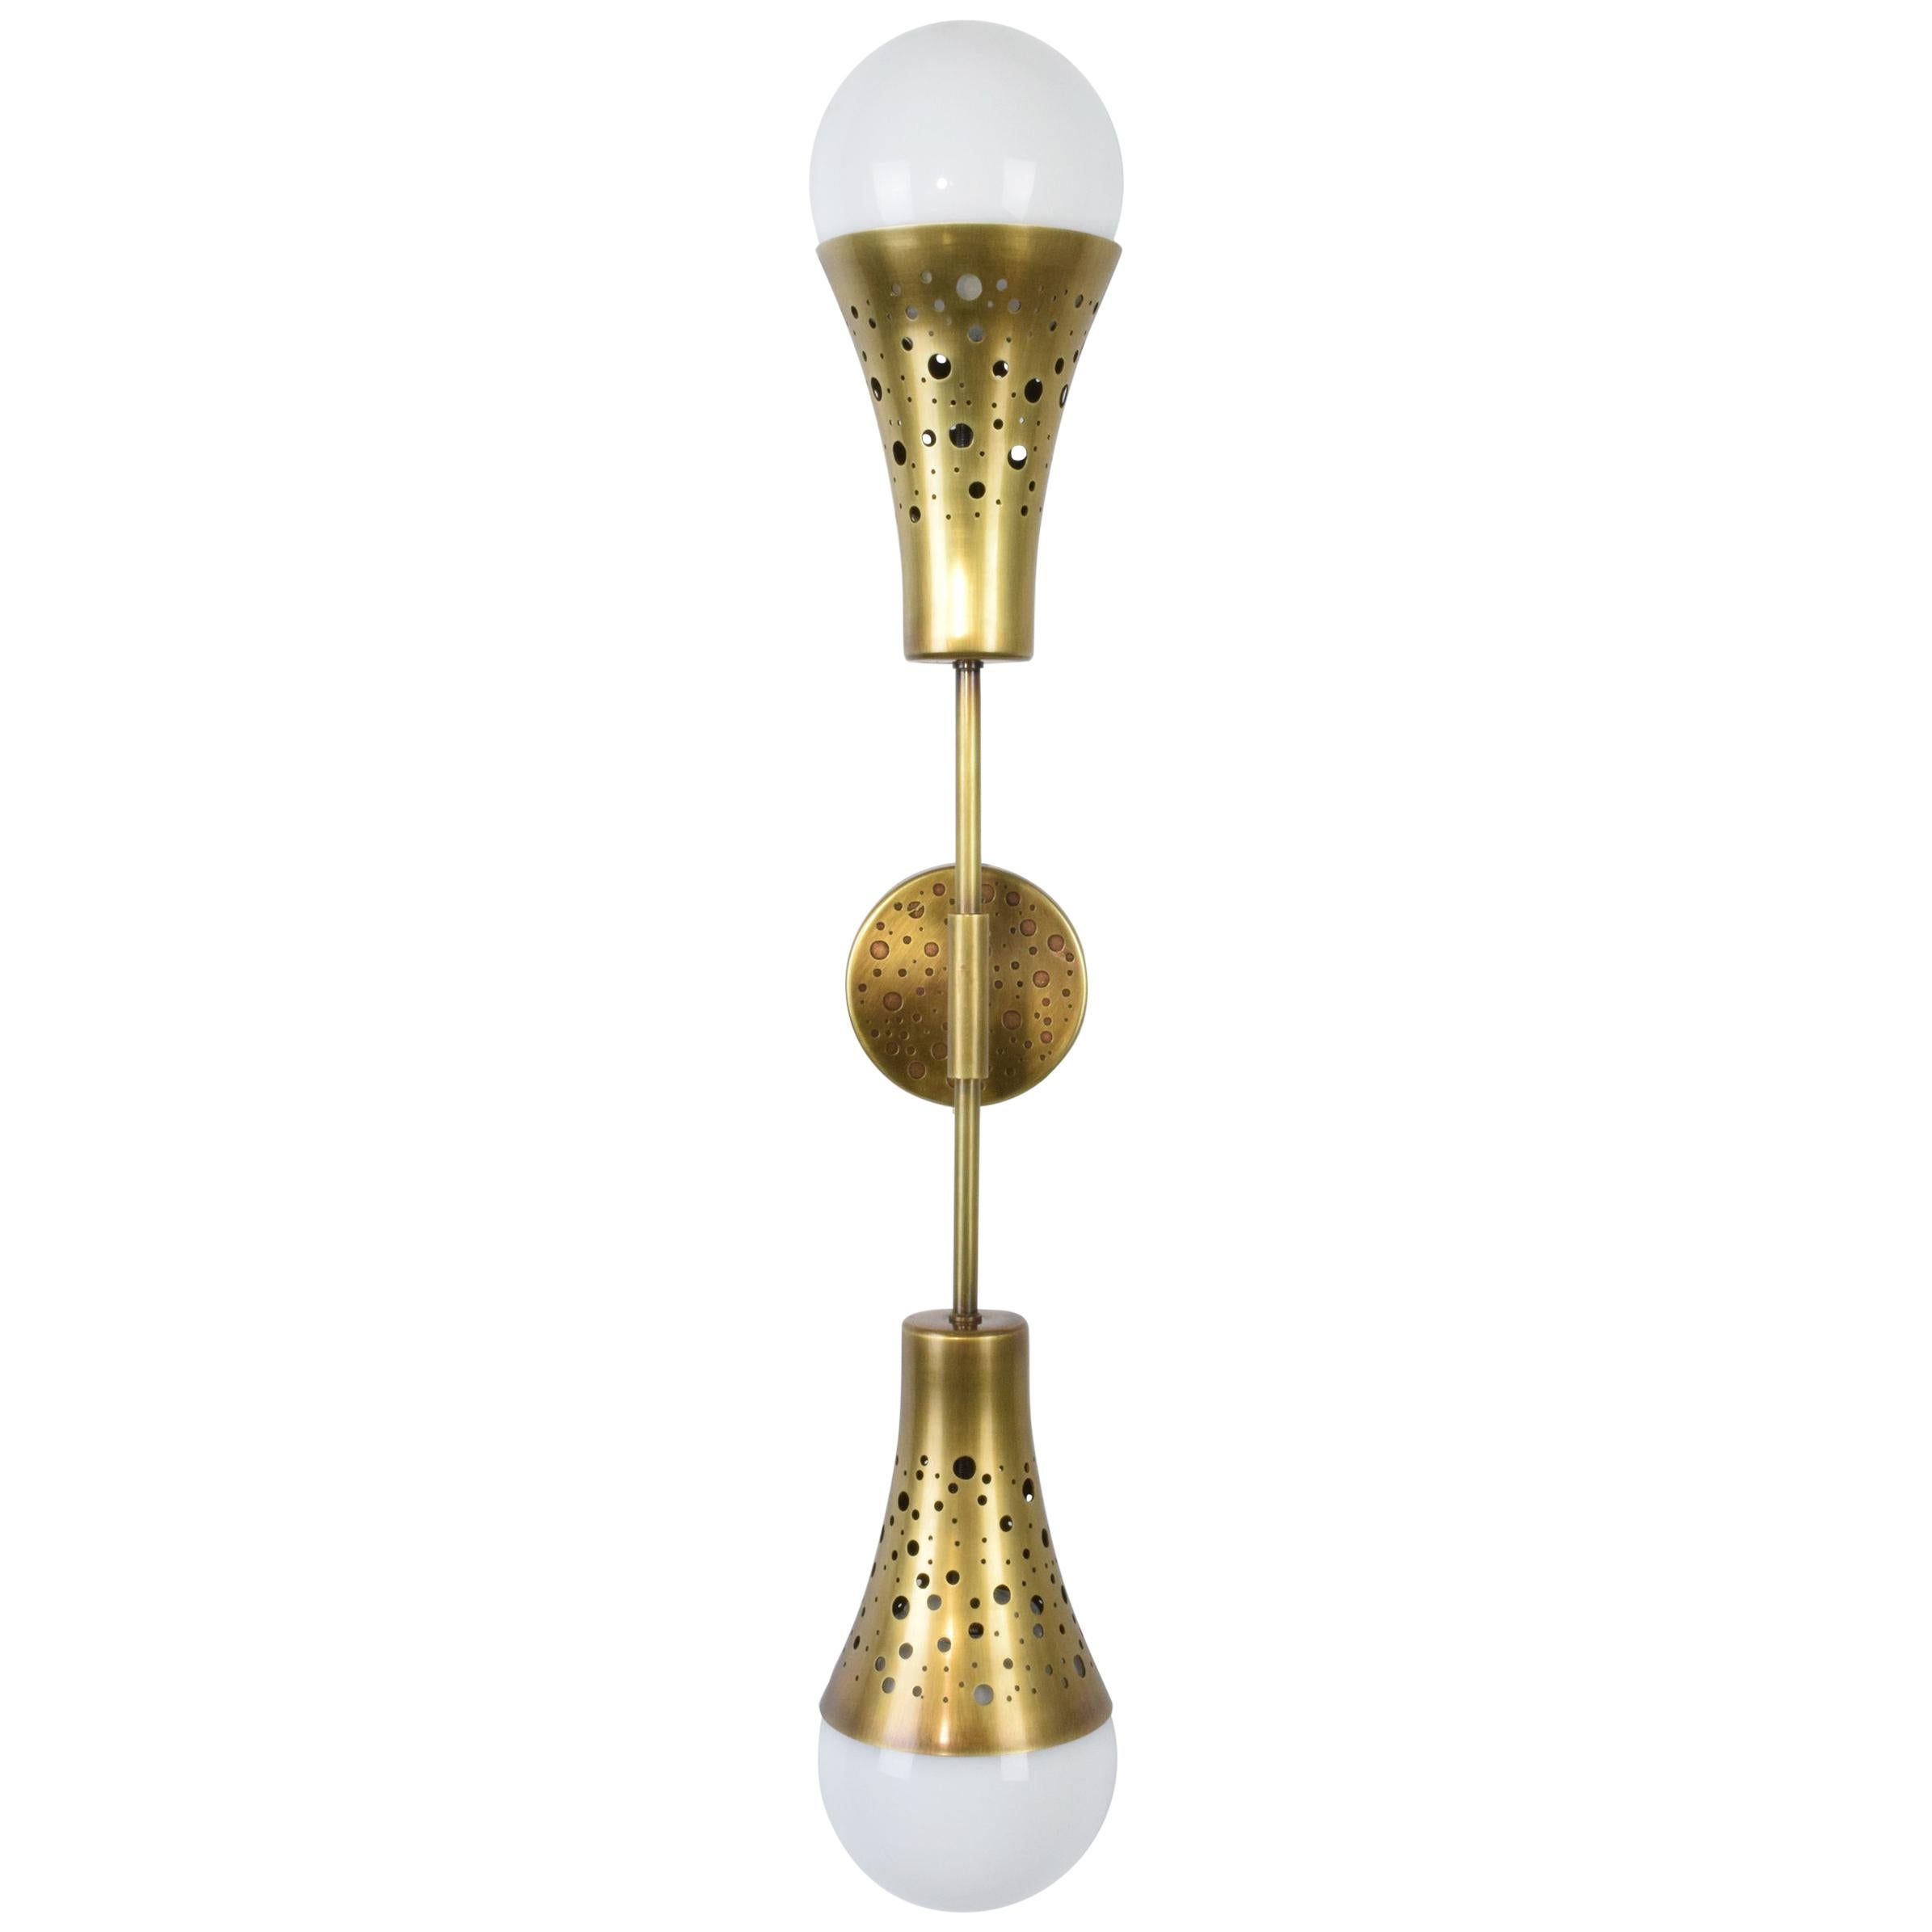 Orbi-w2m2 Perforated Brass Double Wall Light, Flow 2 Collection